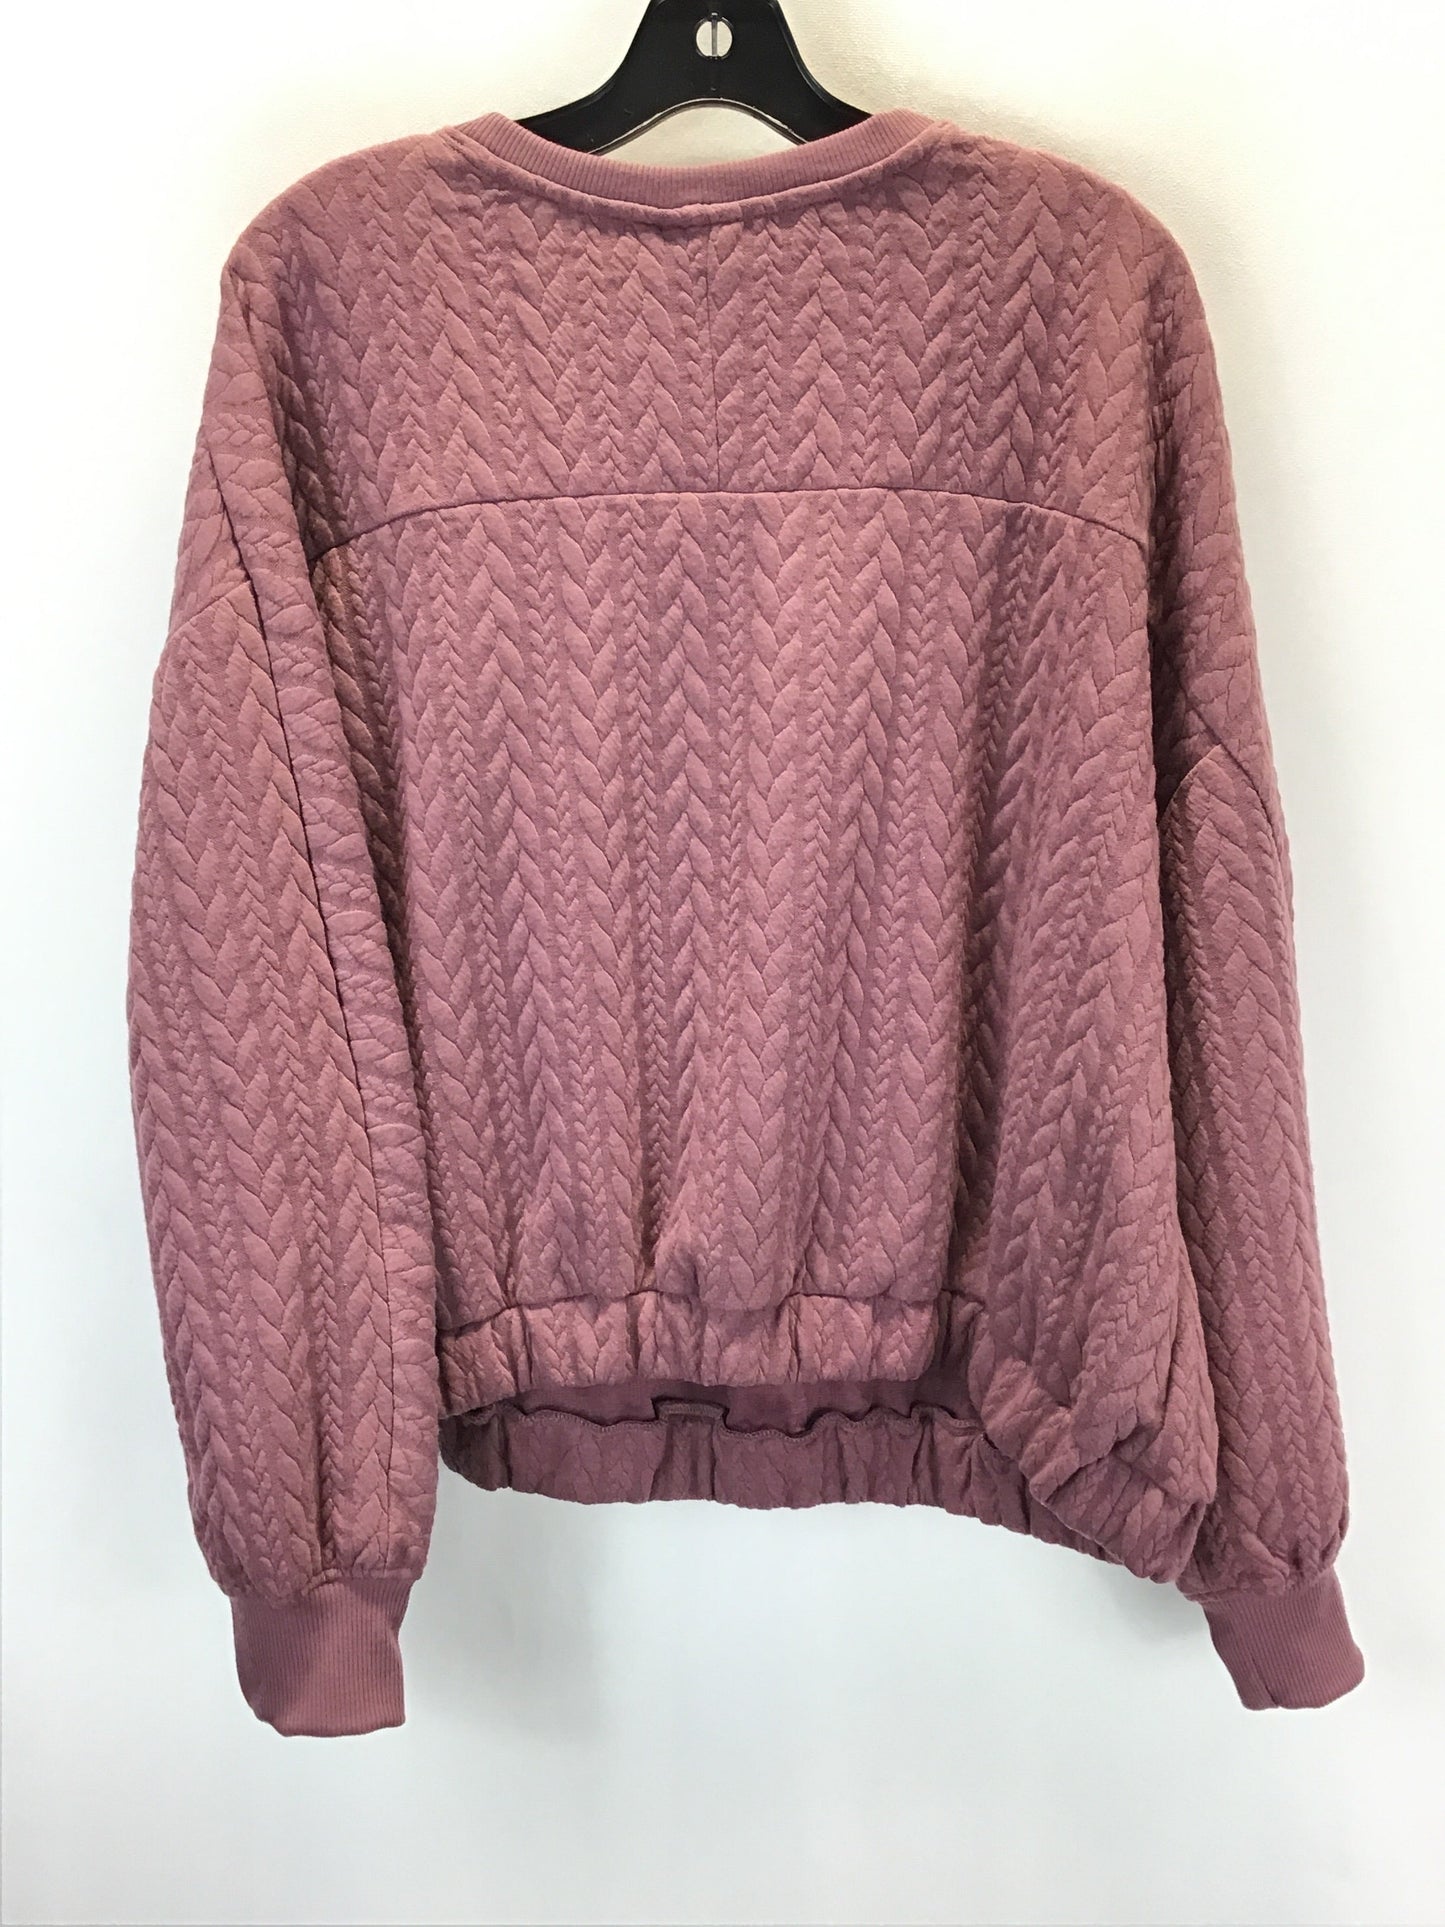 Sweater By A New Day  Size: Xxl